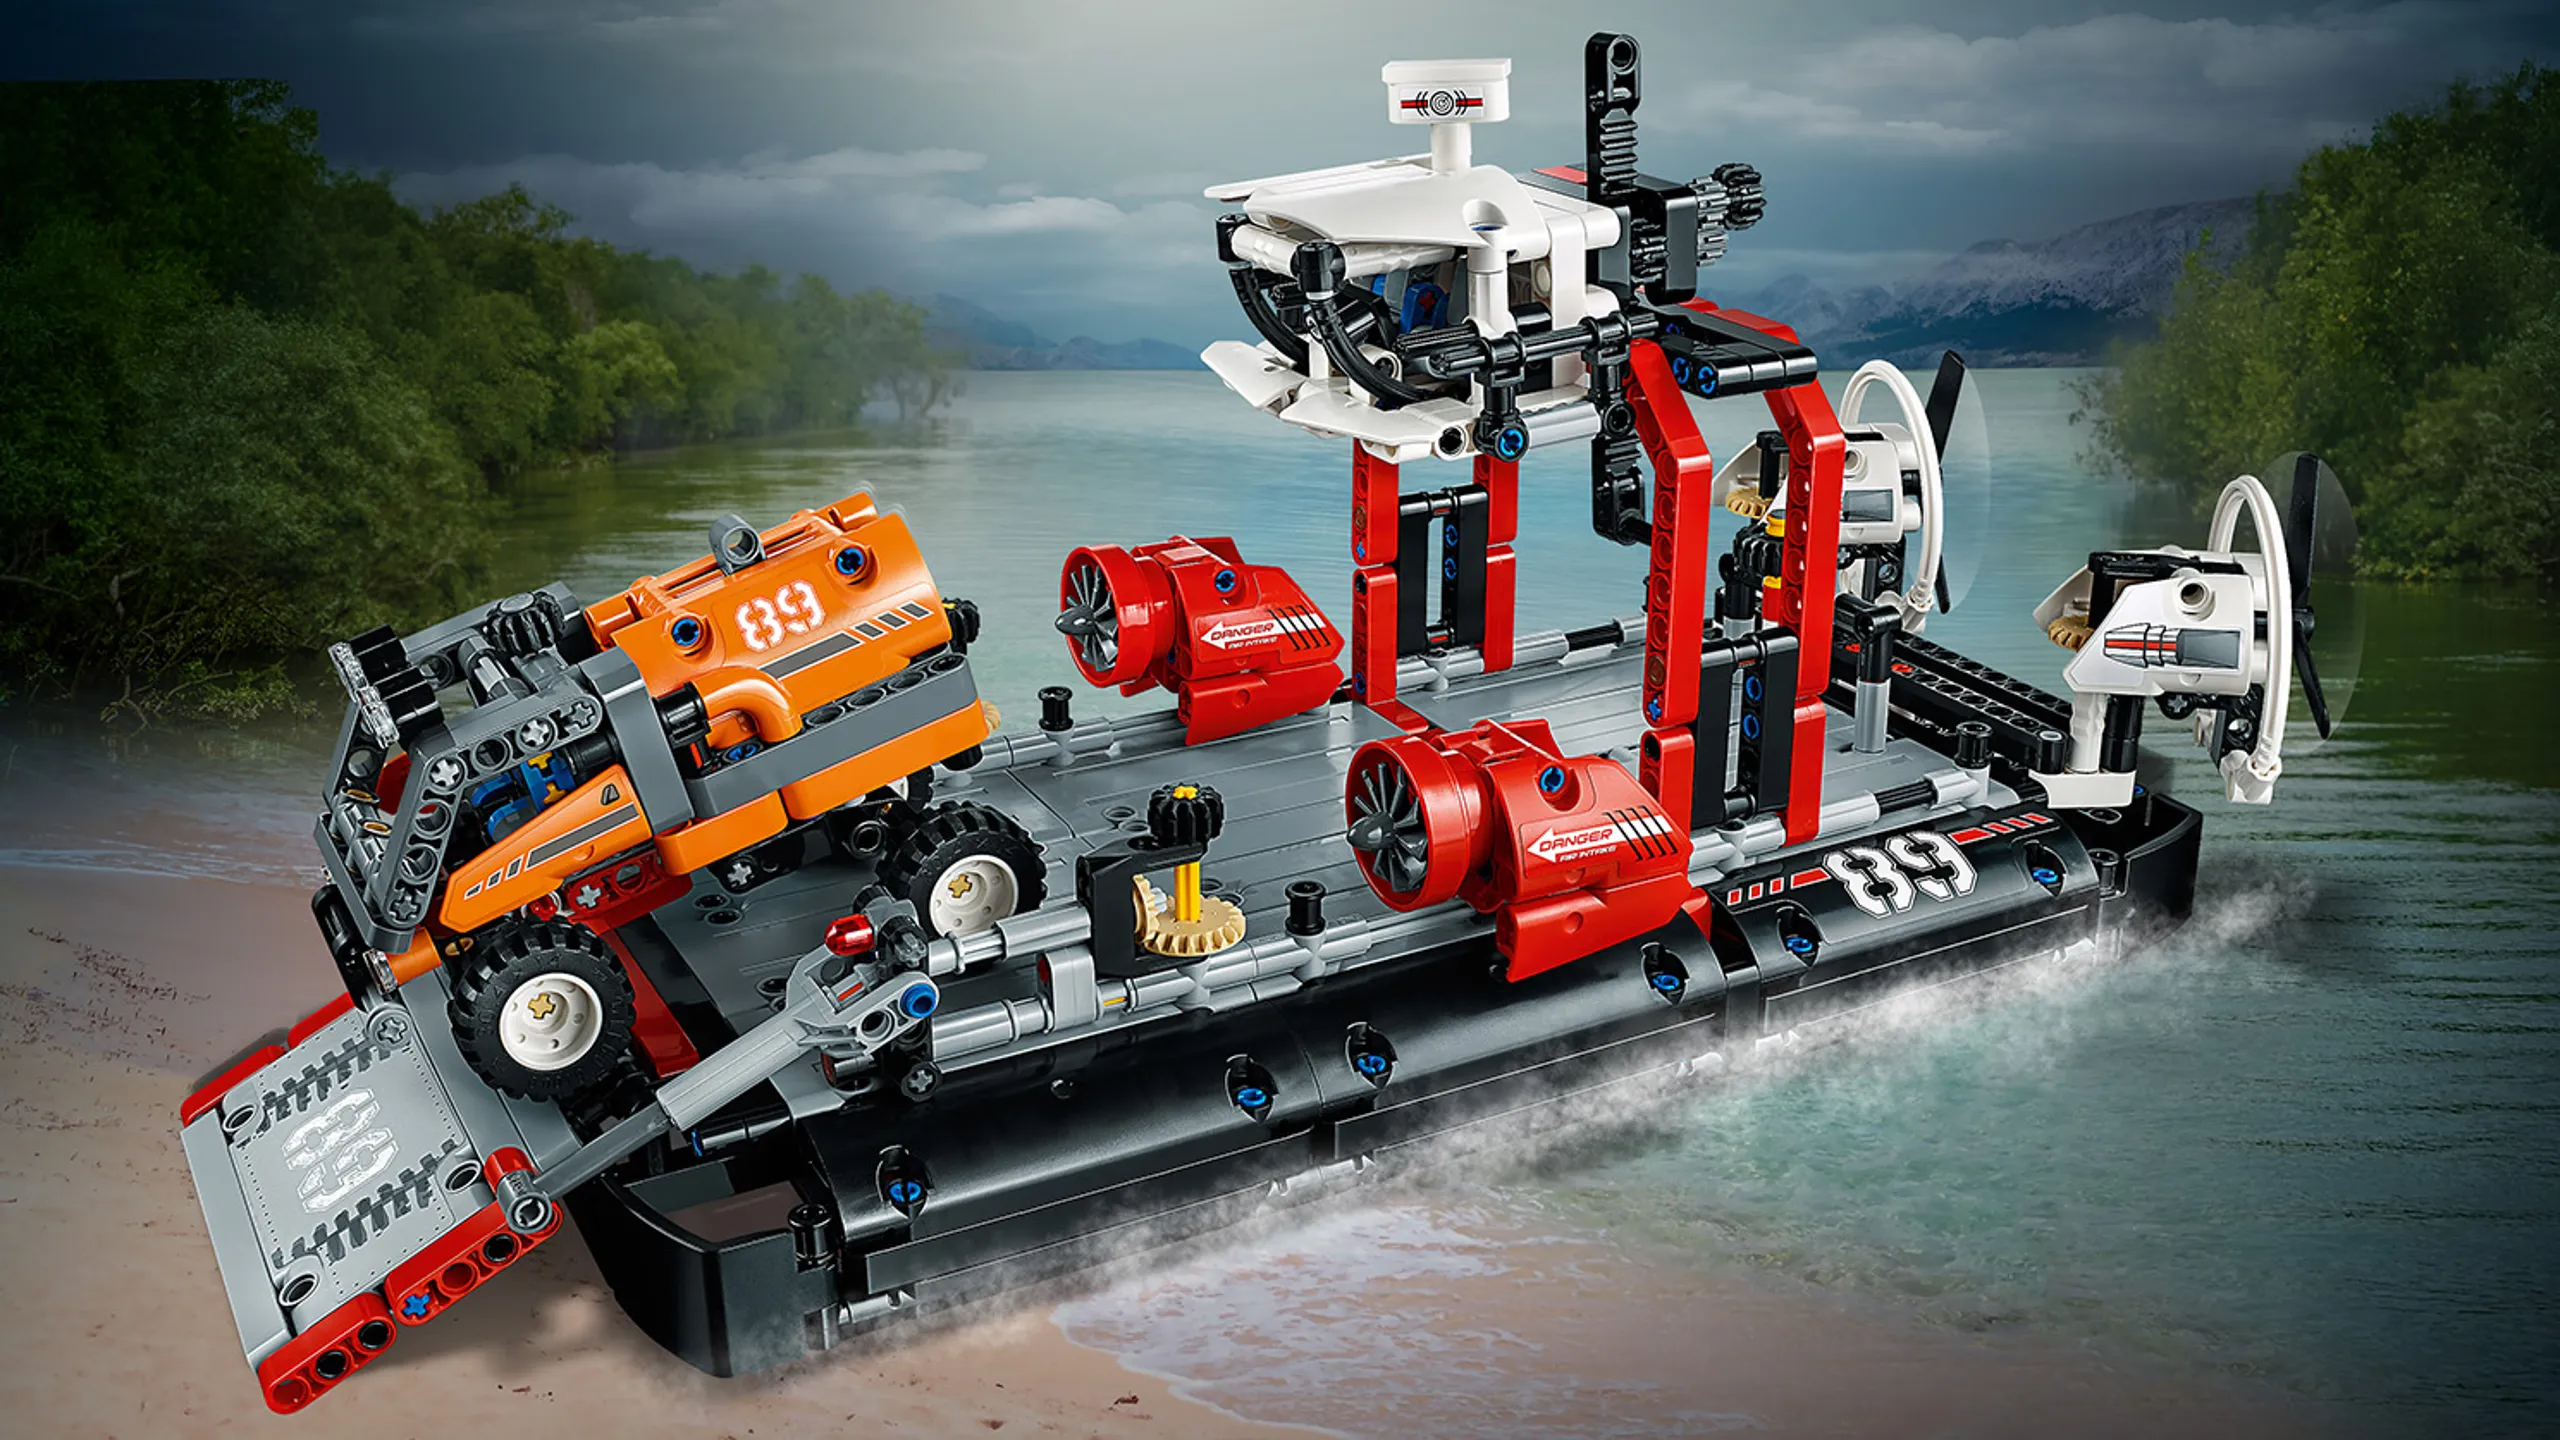 LEGO Technic - 42076 Hovercraft - Access all areas with this Hovercraft set, featuring an elevated cargo crane with operator’s cab and a raisable loading platform, plus a rugged expedition truck with a detachable cargo container.